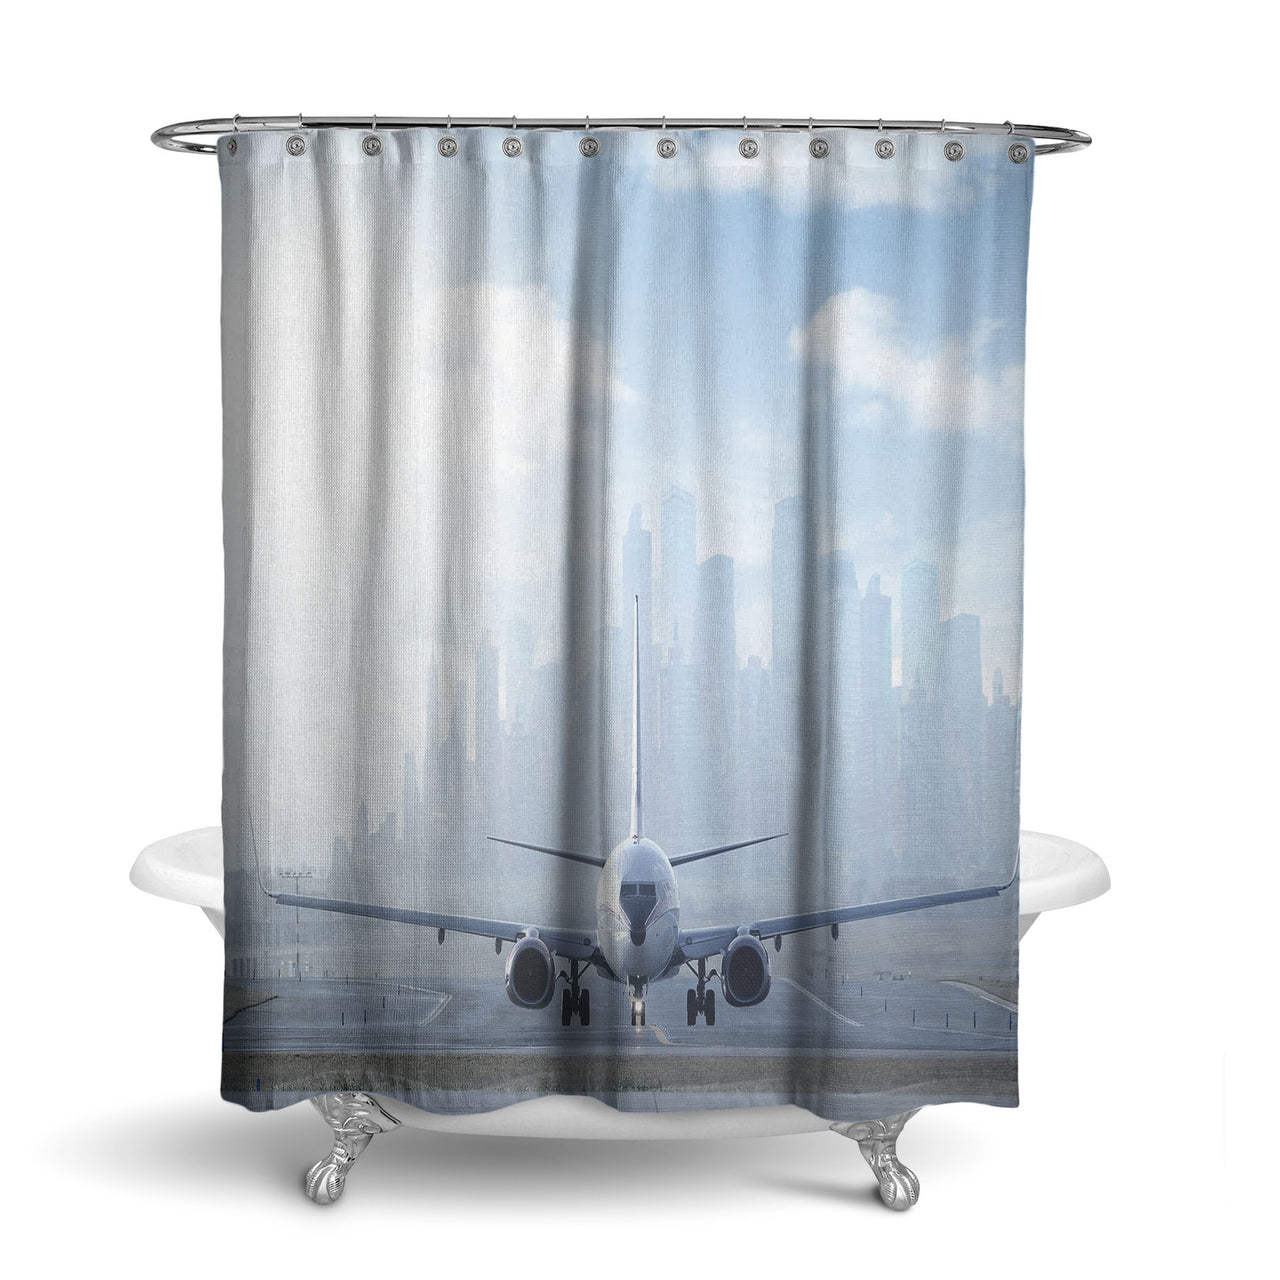 Boeing 737 & City View Behind Designed Shower Curtains